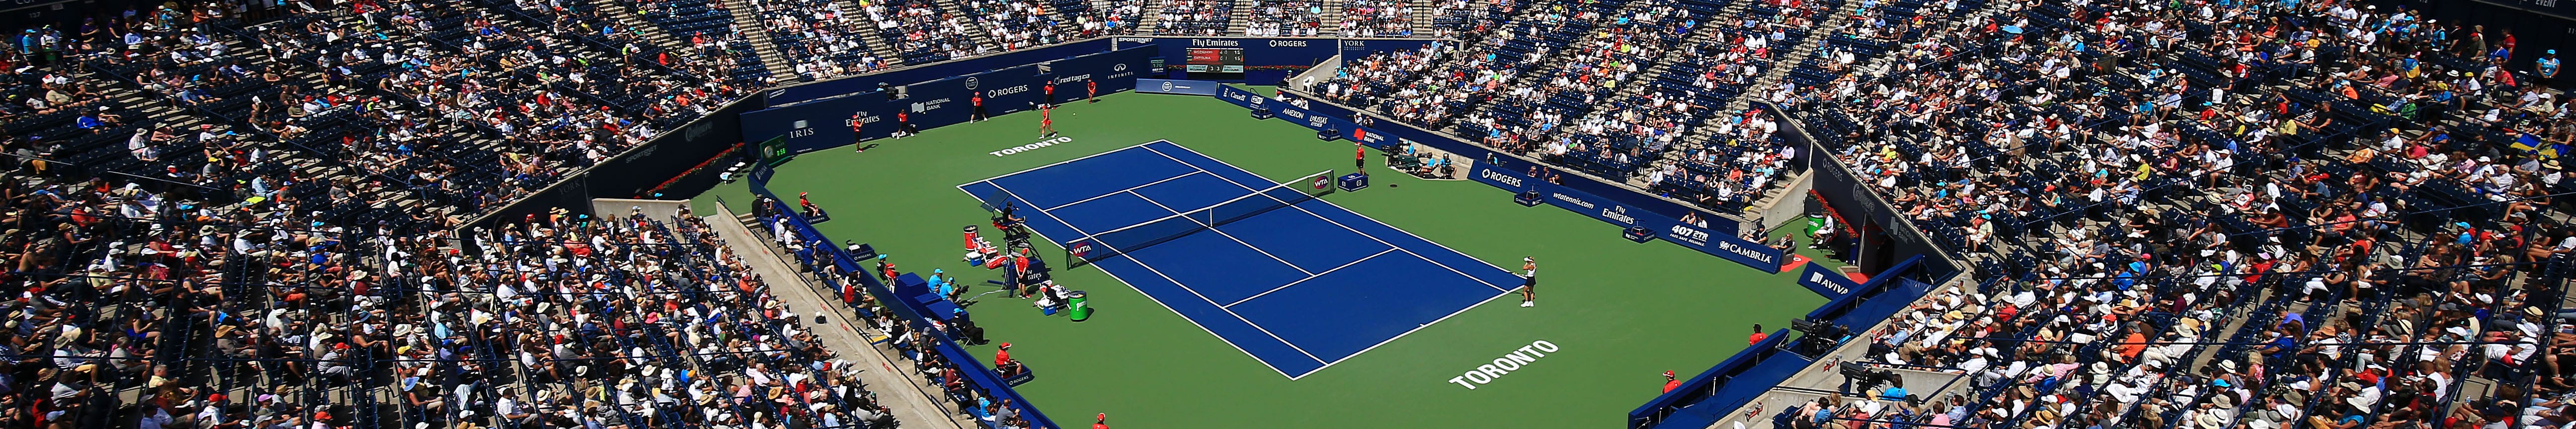 ATP Masters: 10 Highlights in Toronto